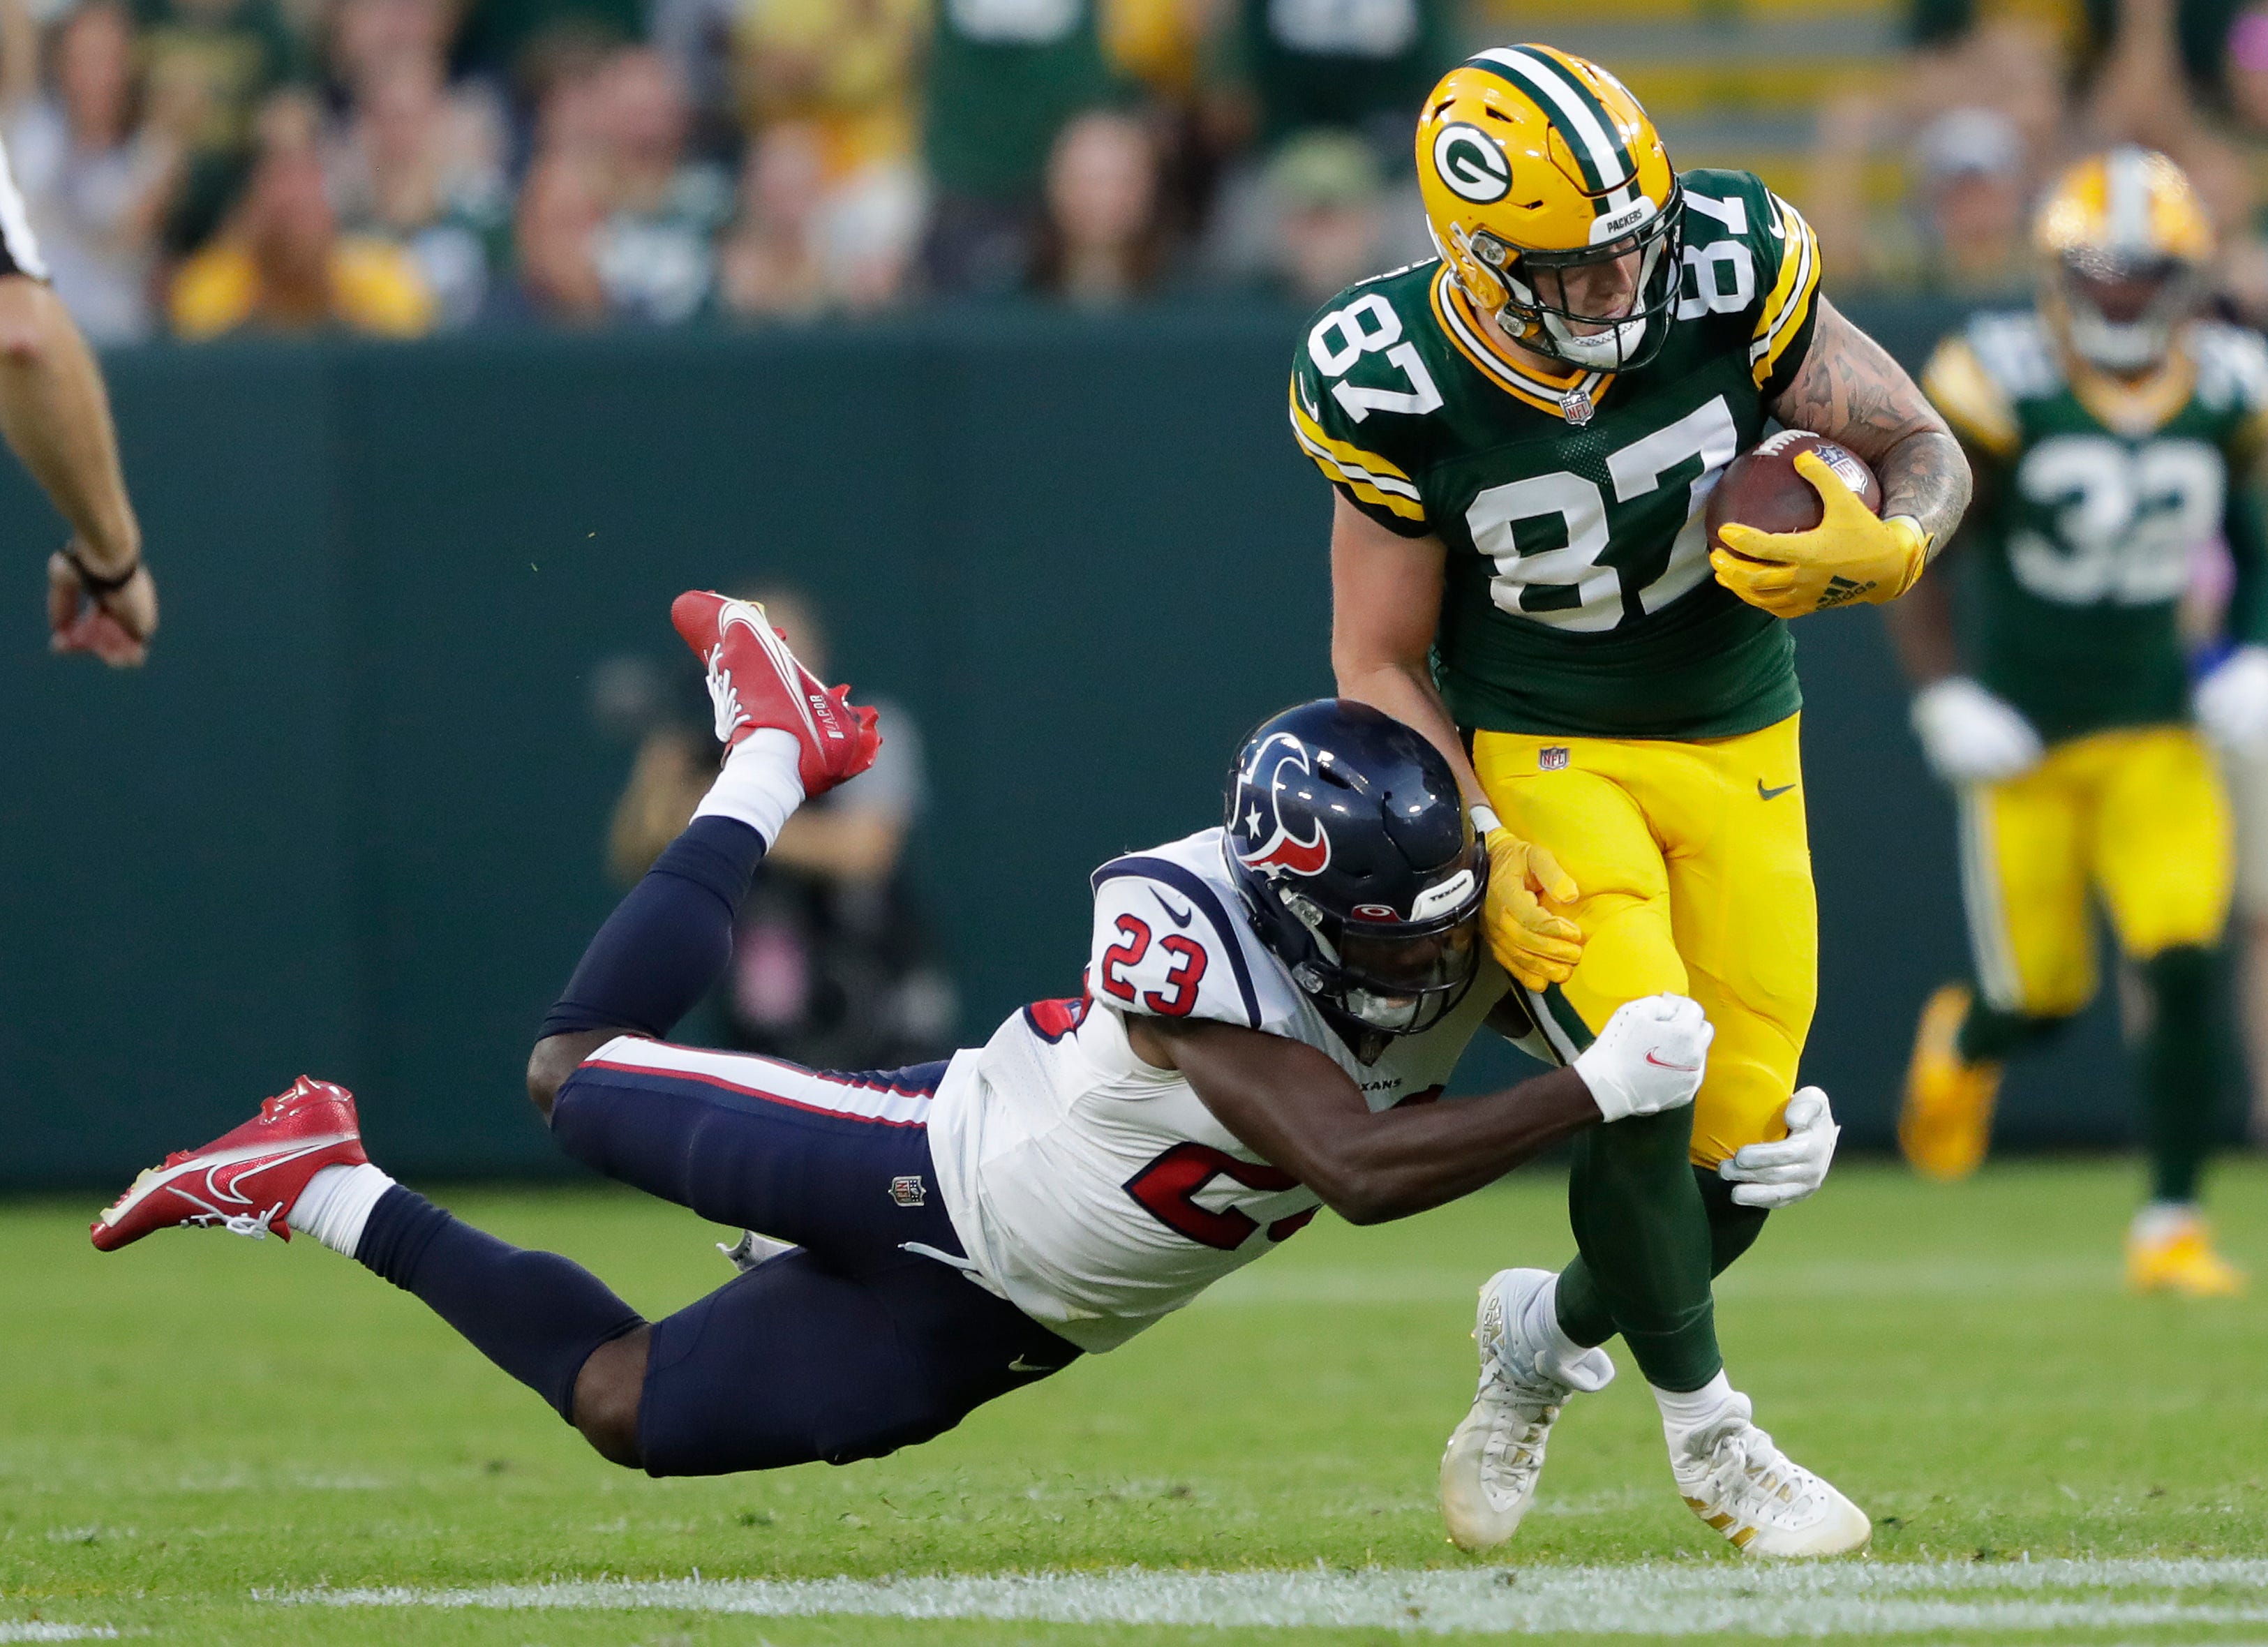 Green Bay Packers tight end Jace Sternberger (87) runs for yardage on a first down reception against Houston Texans safety Eric Murray (23) during a preseason game on Saturday, Aug. 14, 2021, at Lambeau Field in Green Bay.